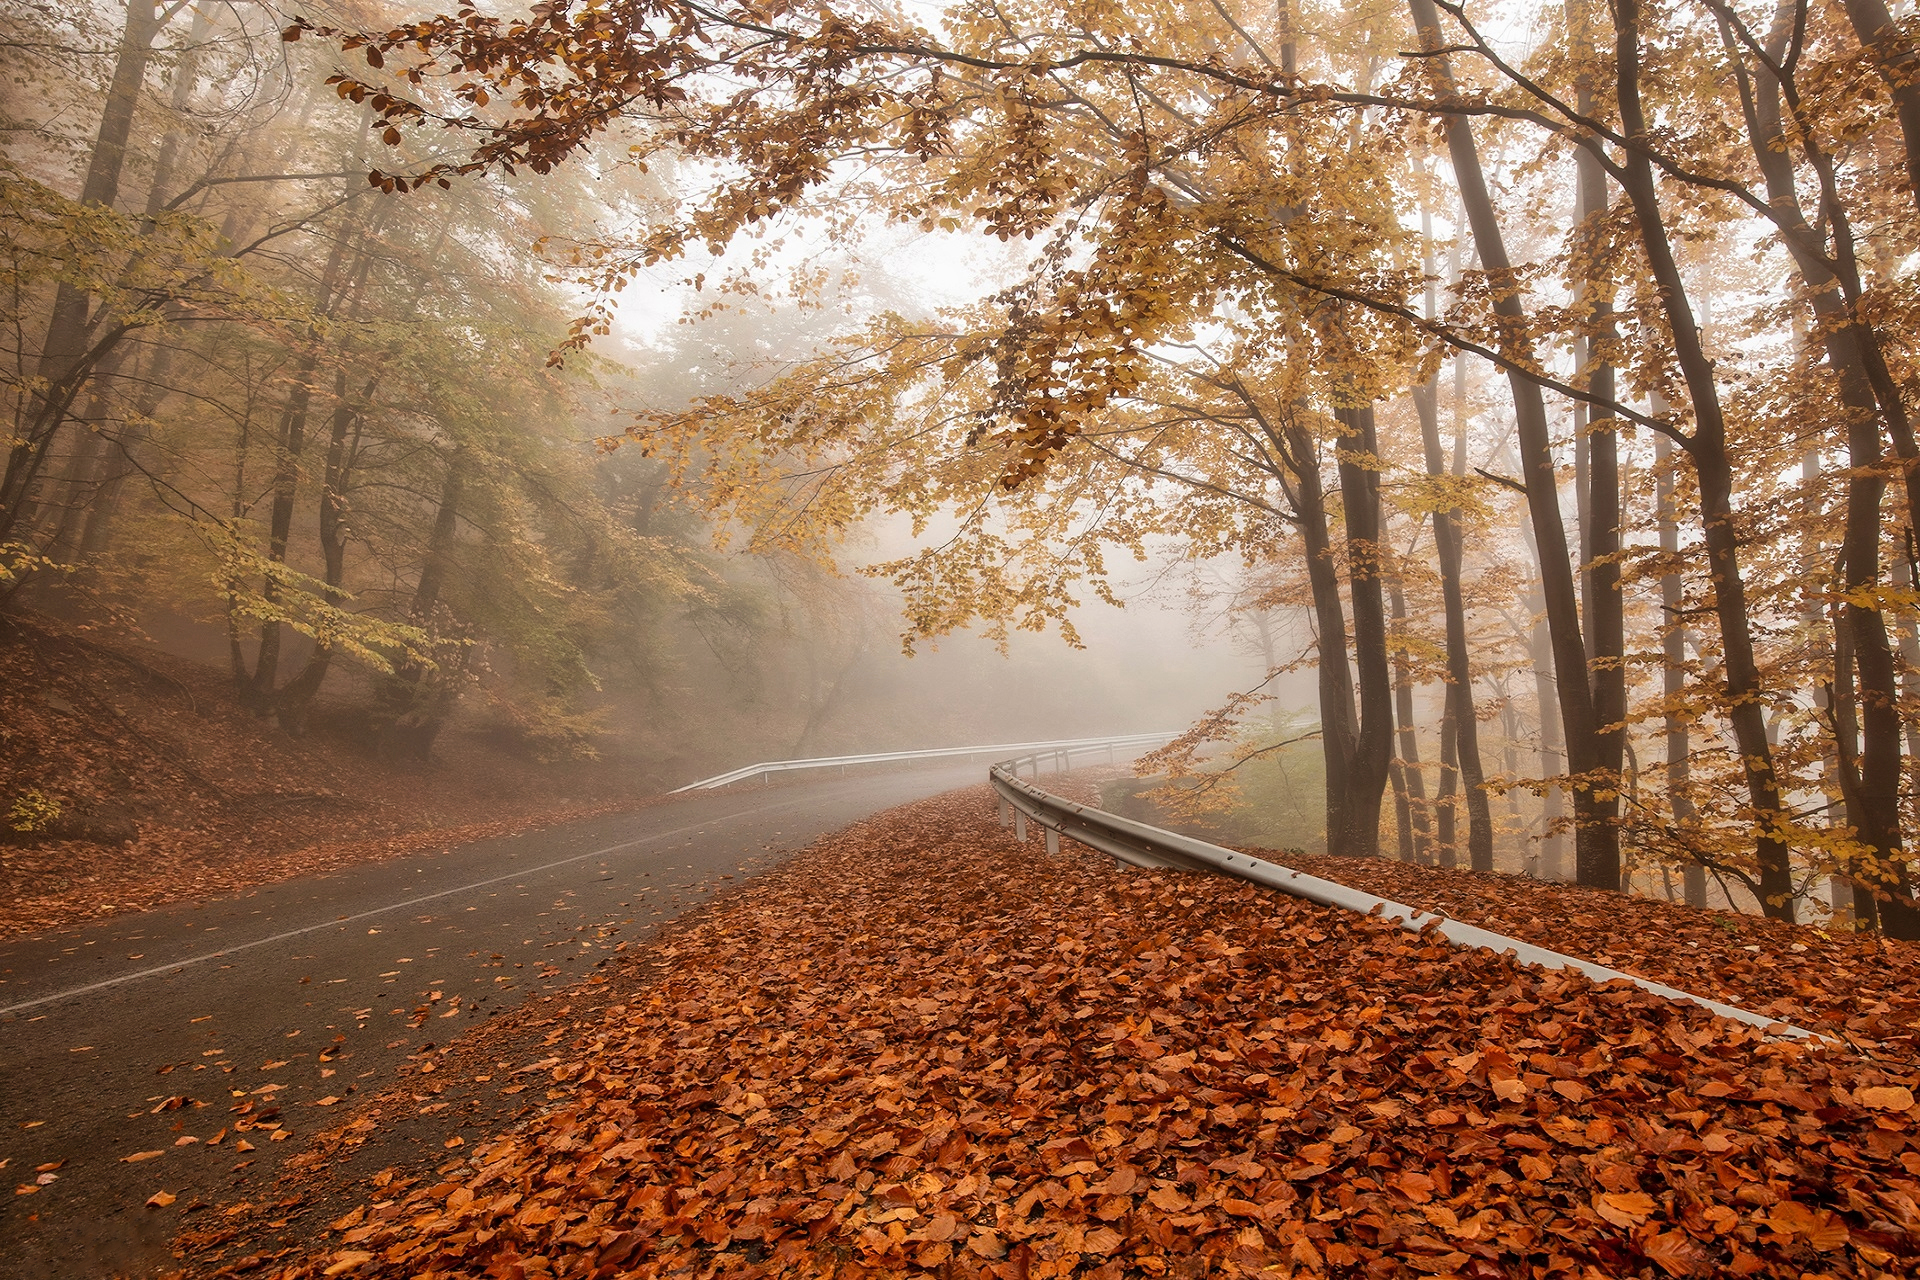 General 1920x1280 leaves fall nature mist overcast trees road photography landscape